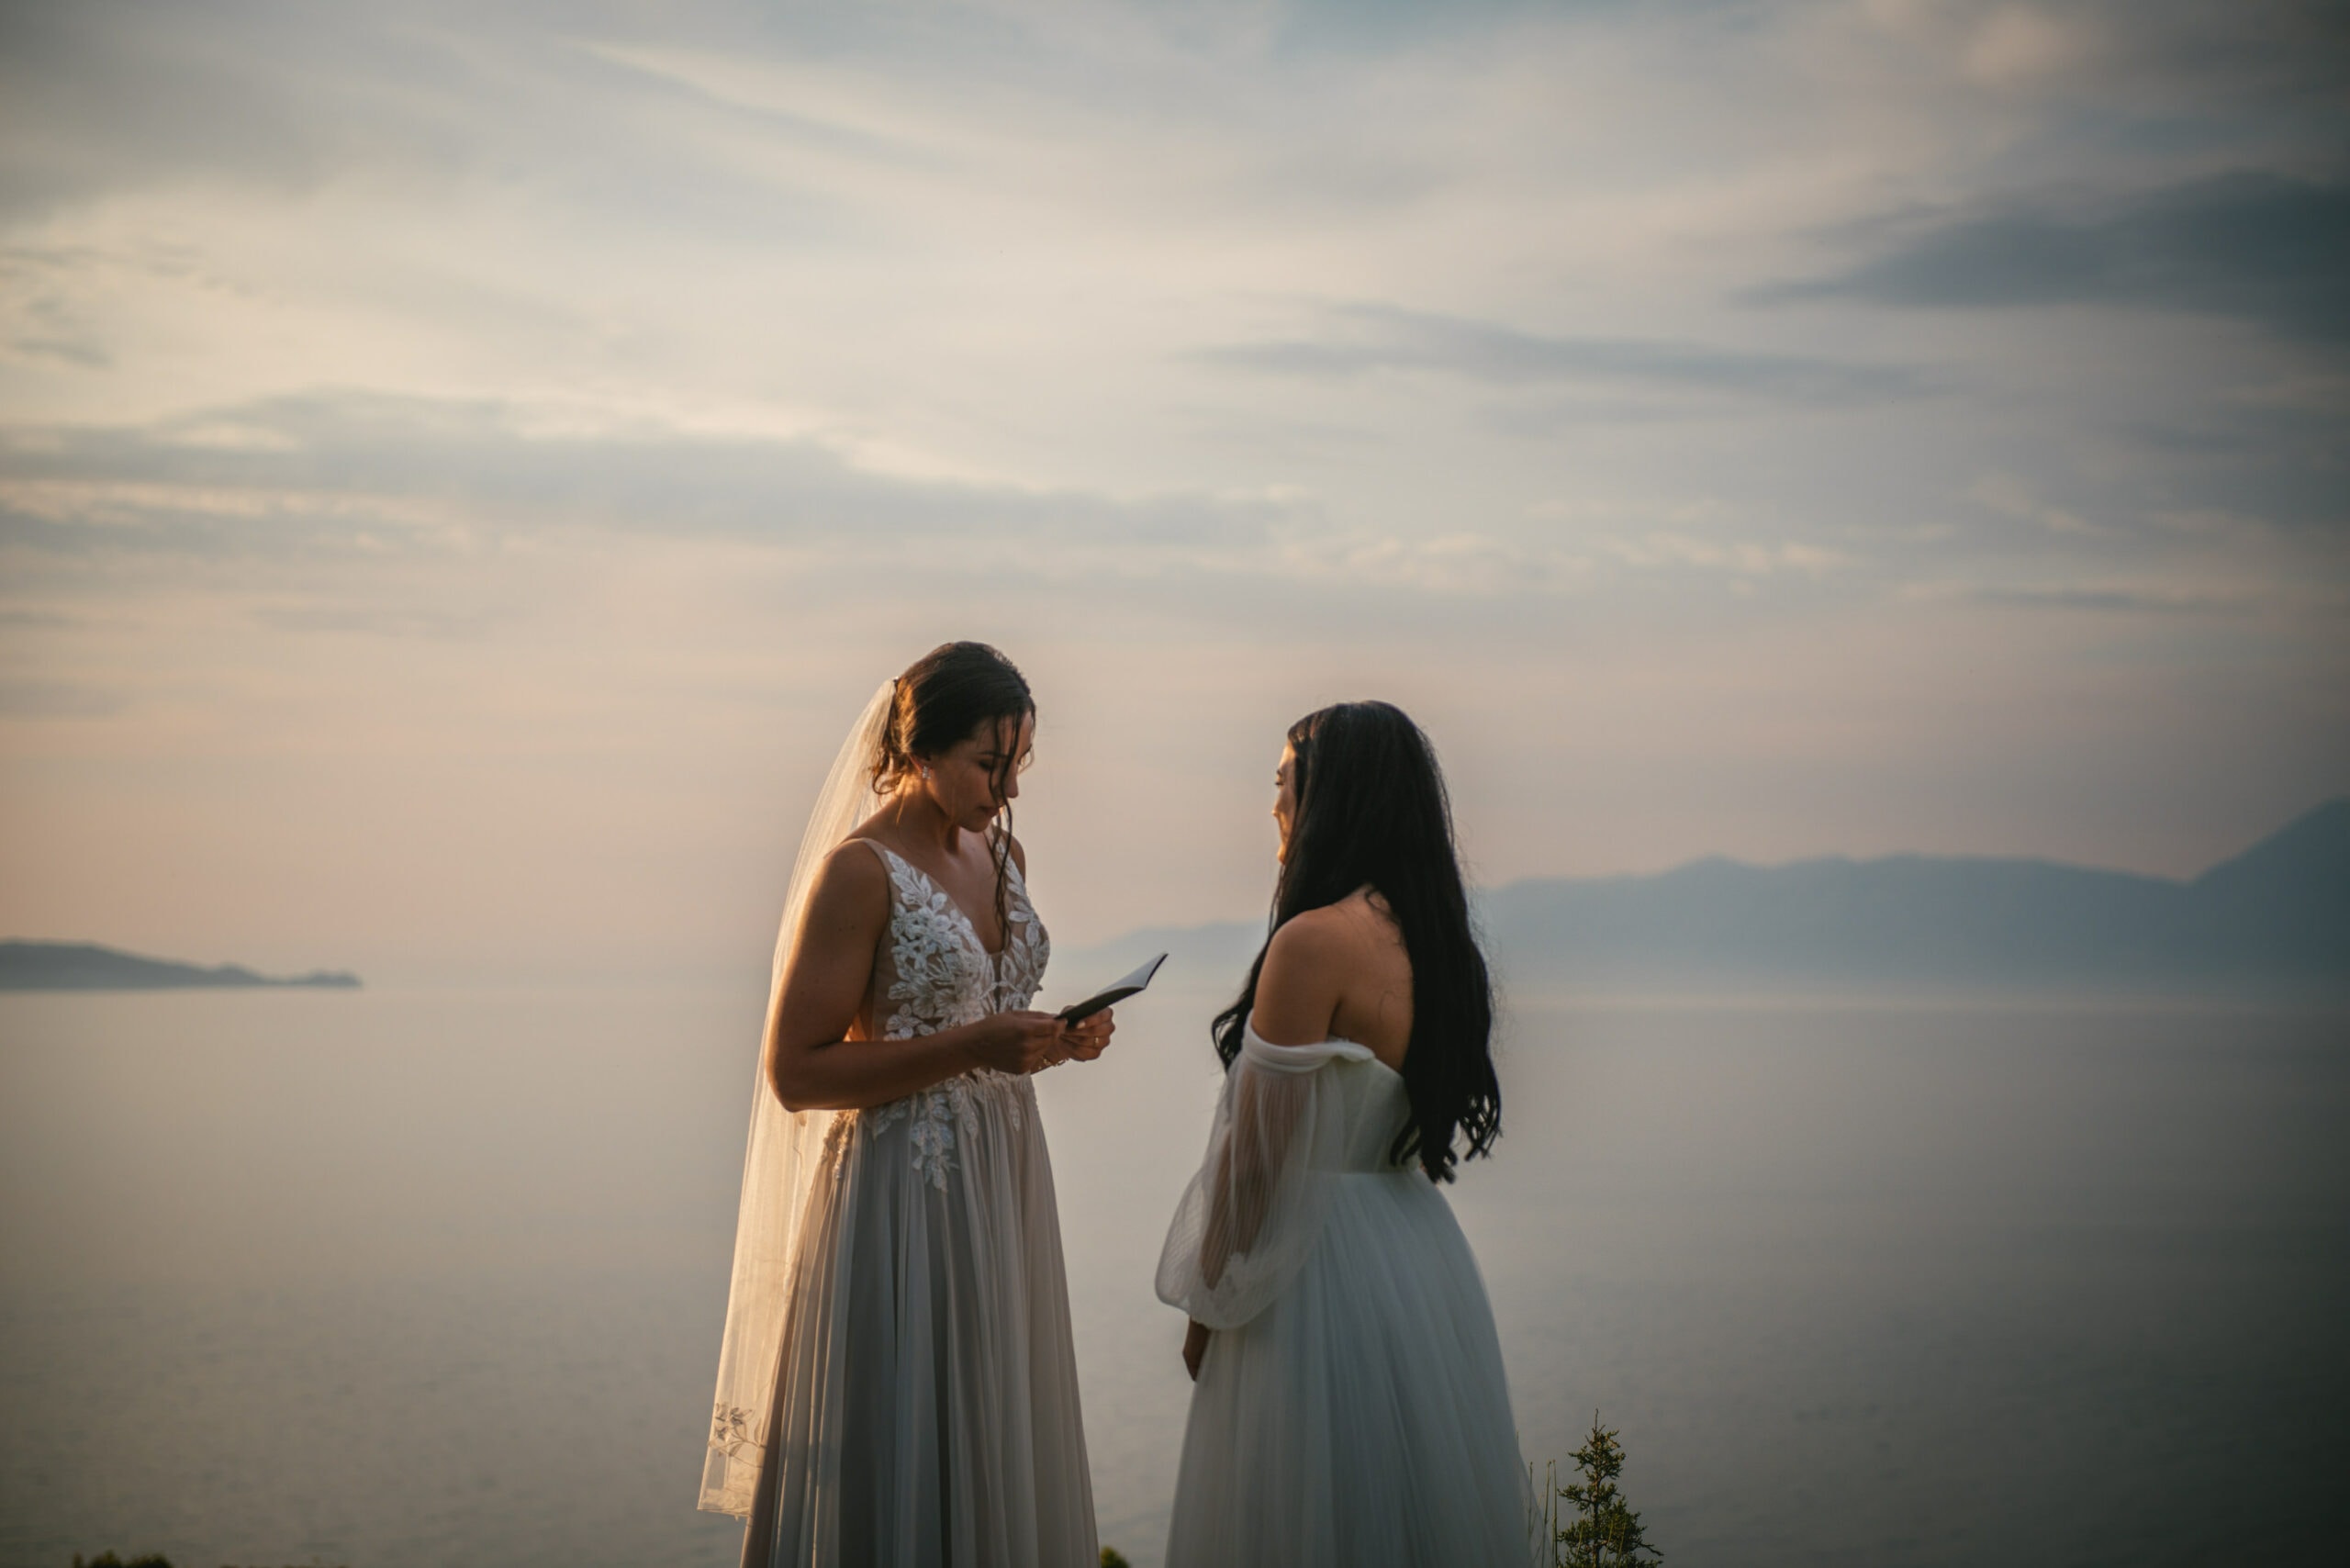 The couple gazing into each other's eyes, united in their Corfu elopement.